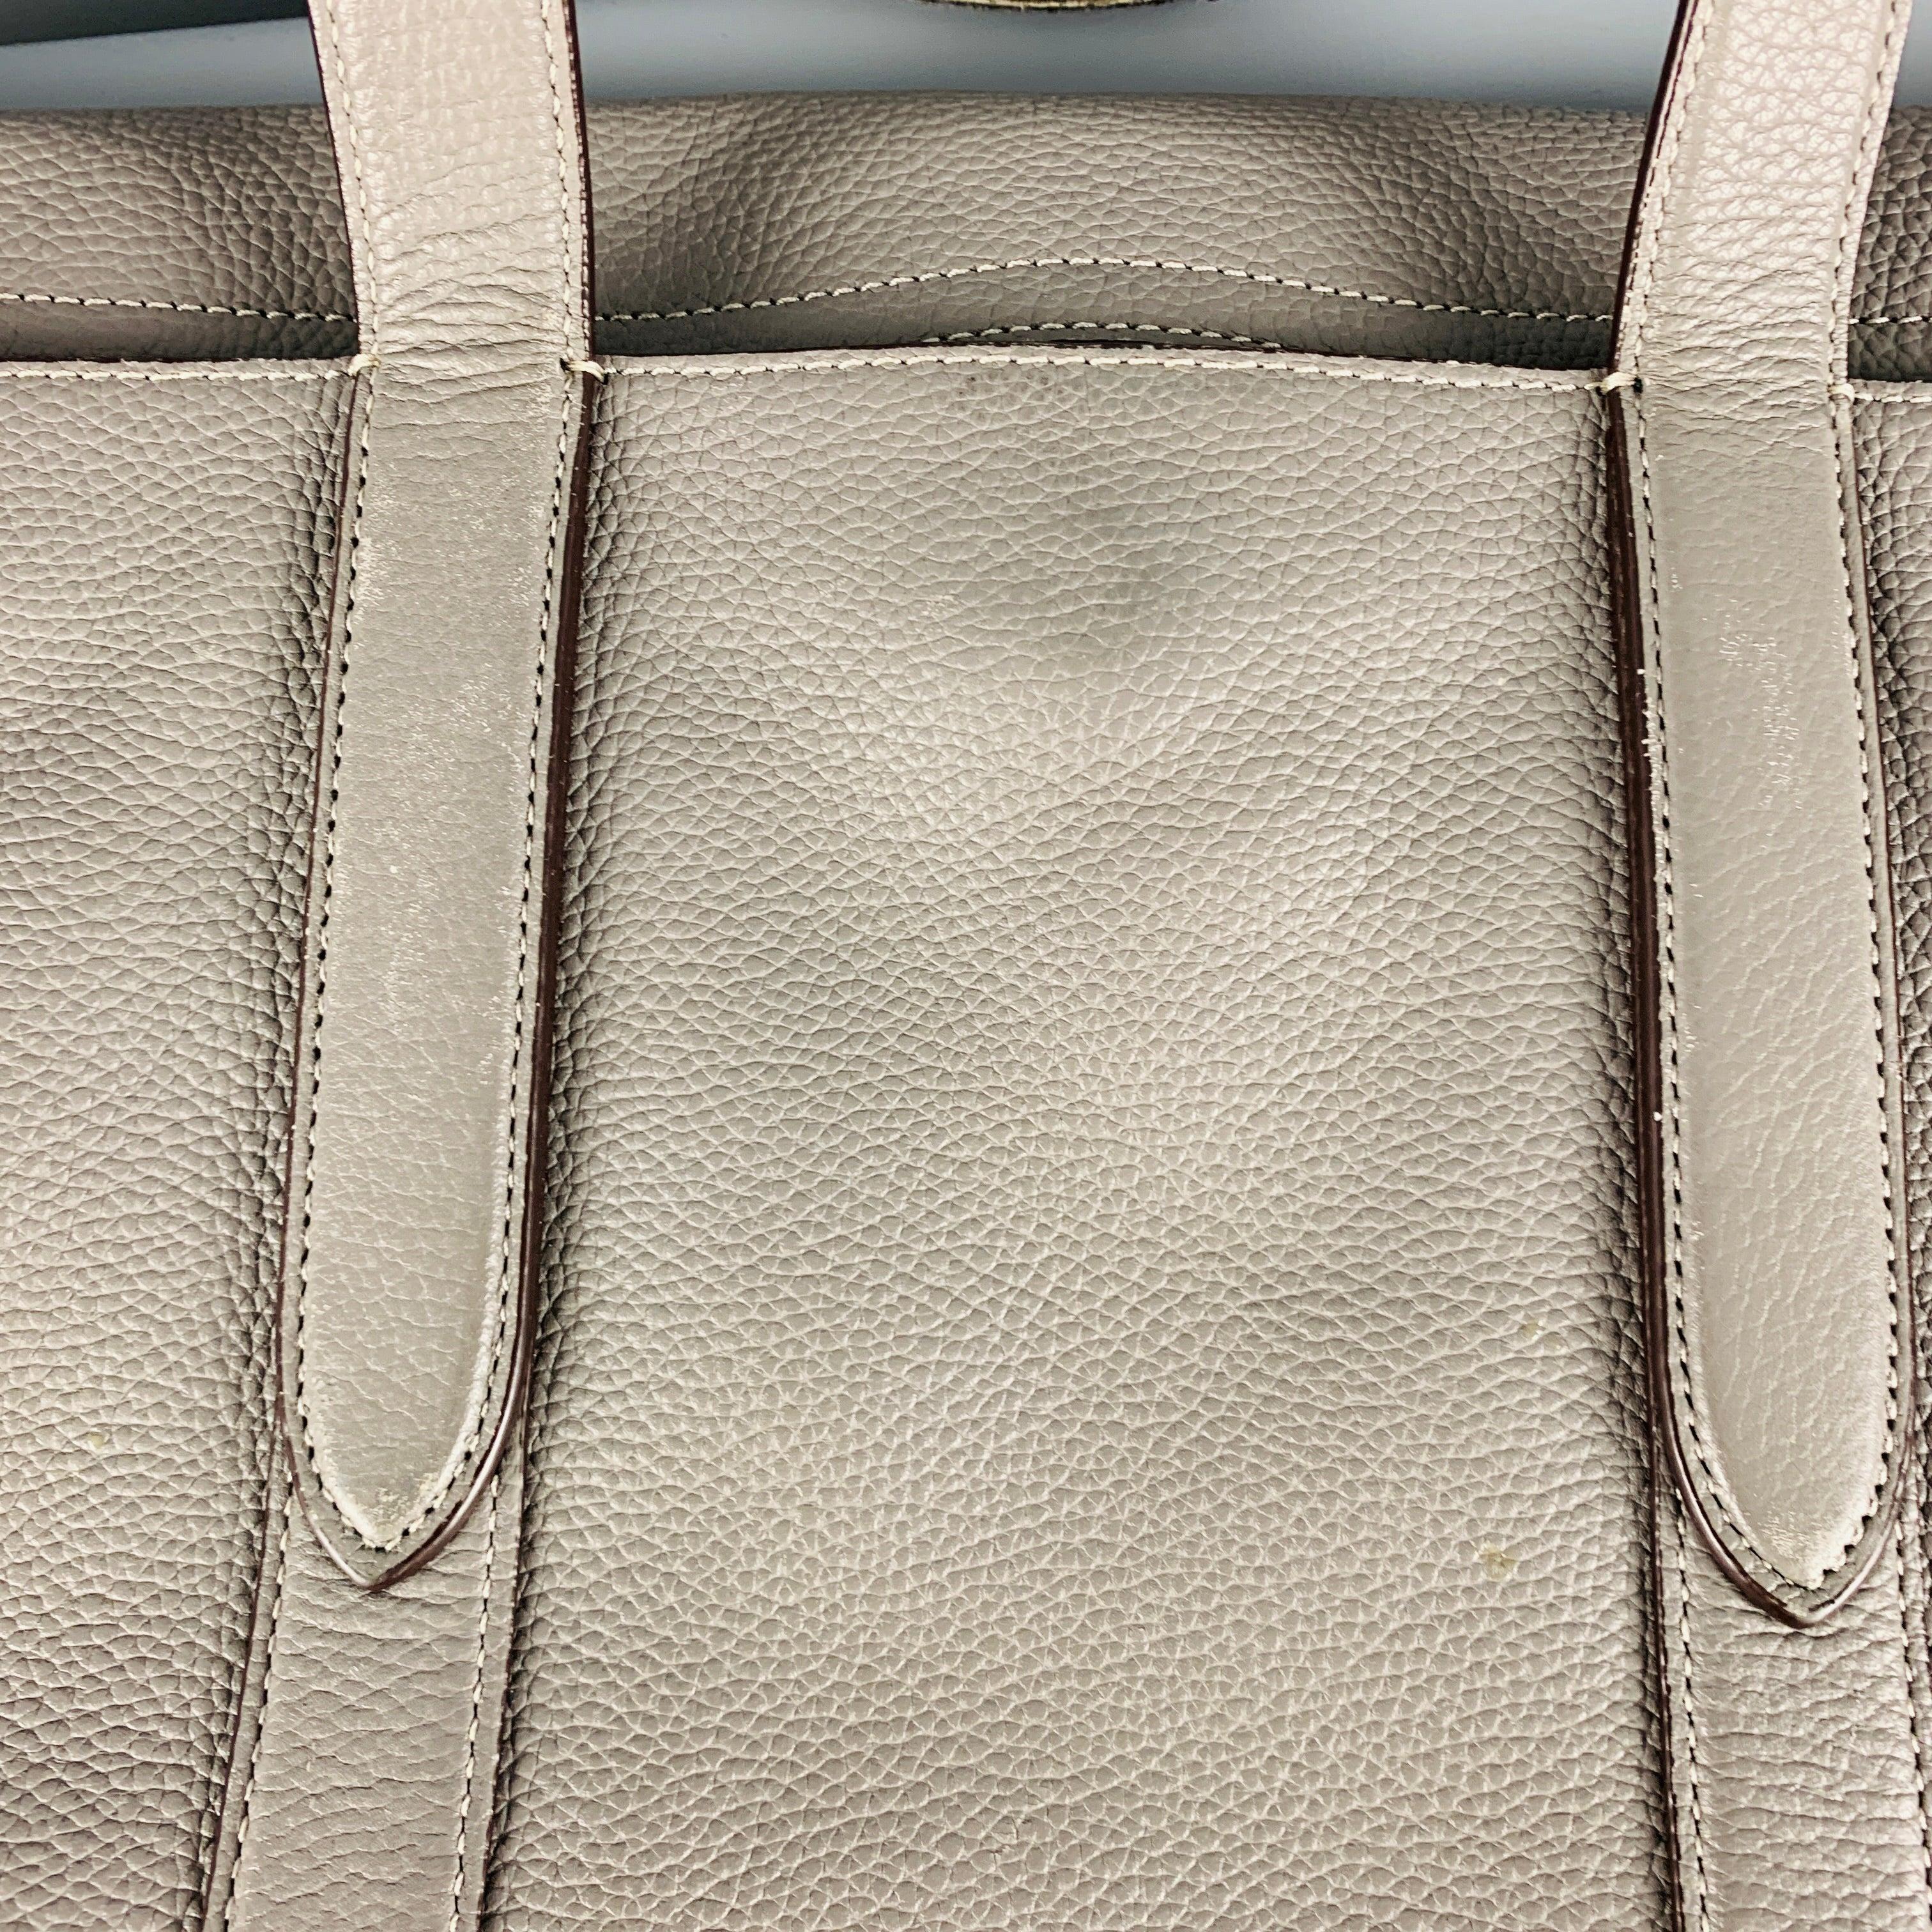 COACH Grey Pebble Grain Leather Tote Bag For Sale 6